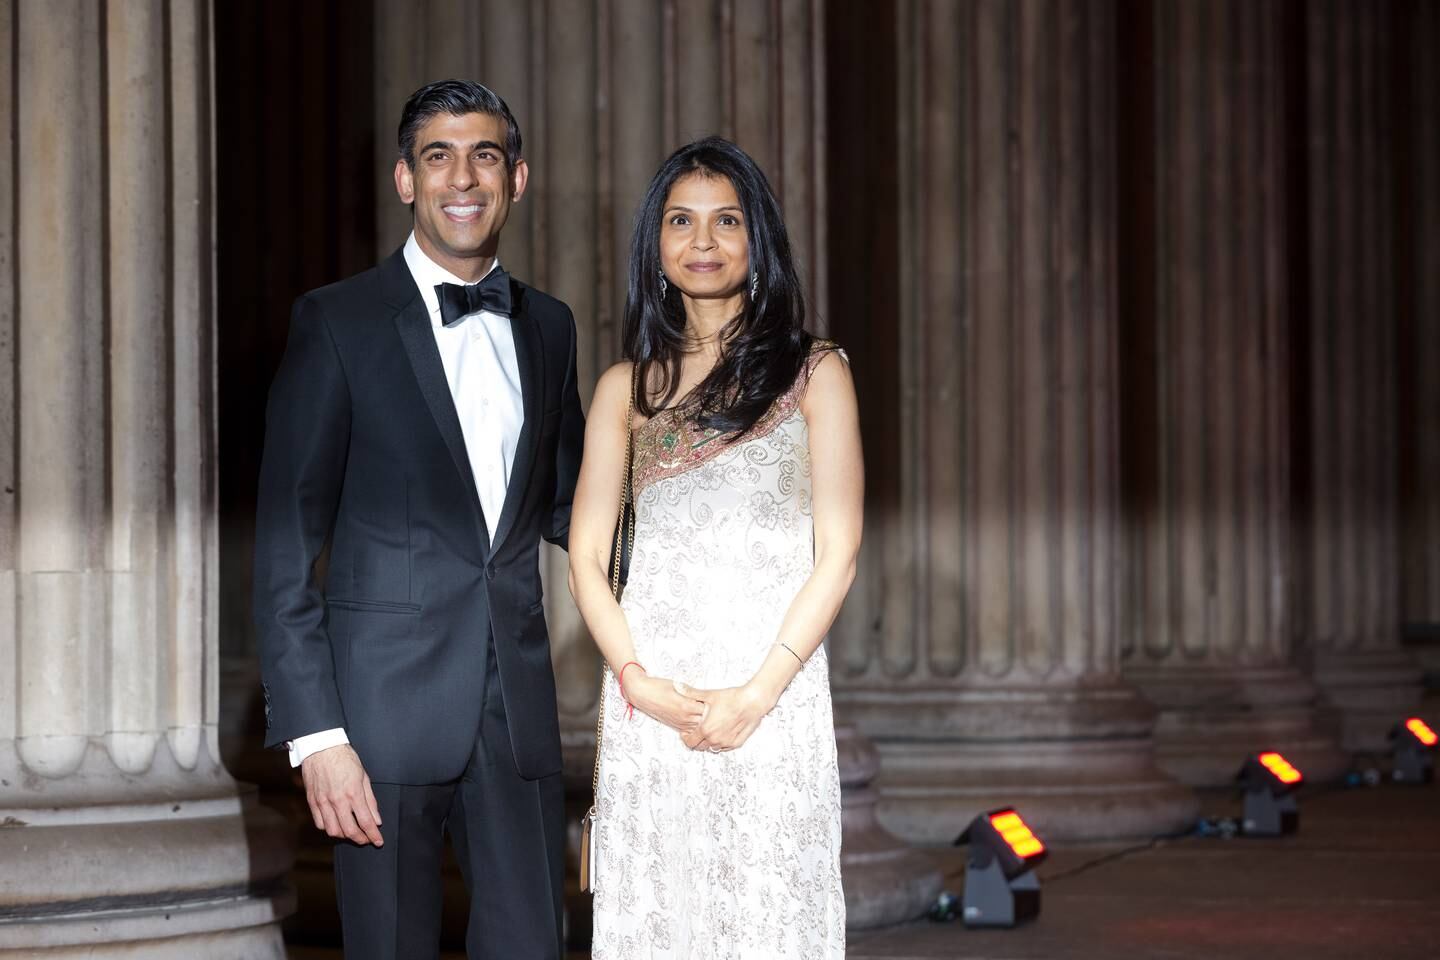 Britain’s Chancellor of the Exchequer Rishi Sunak and his wife Akshata Murthy arrive for the British Asian Trust Reception at the British Museum in London on February 9. EPA